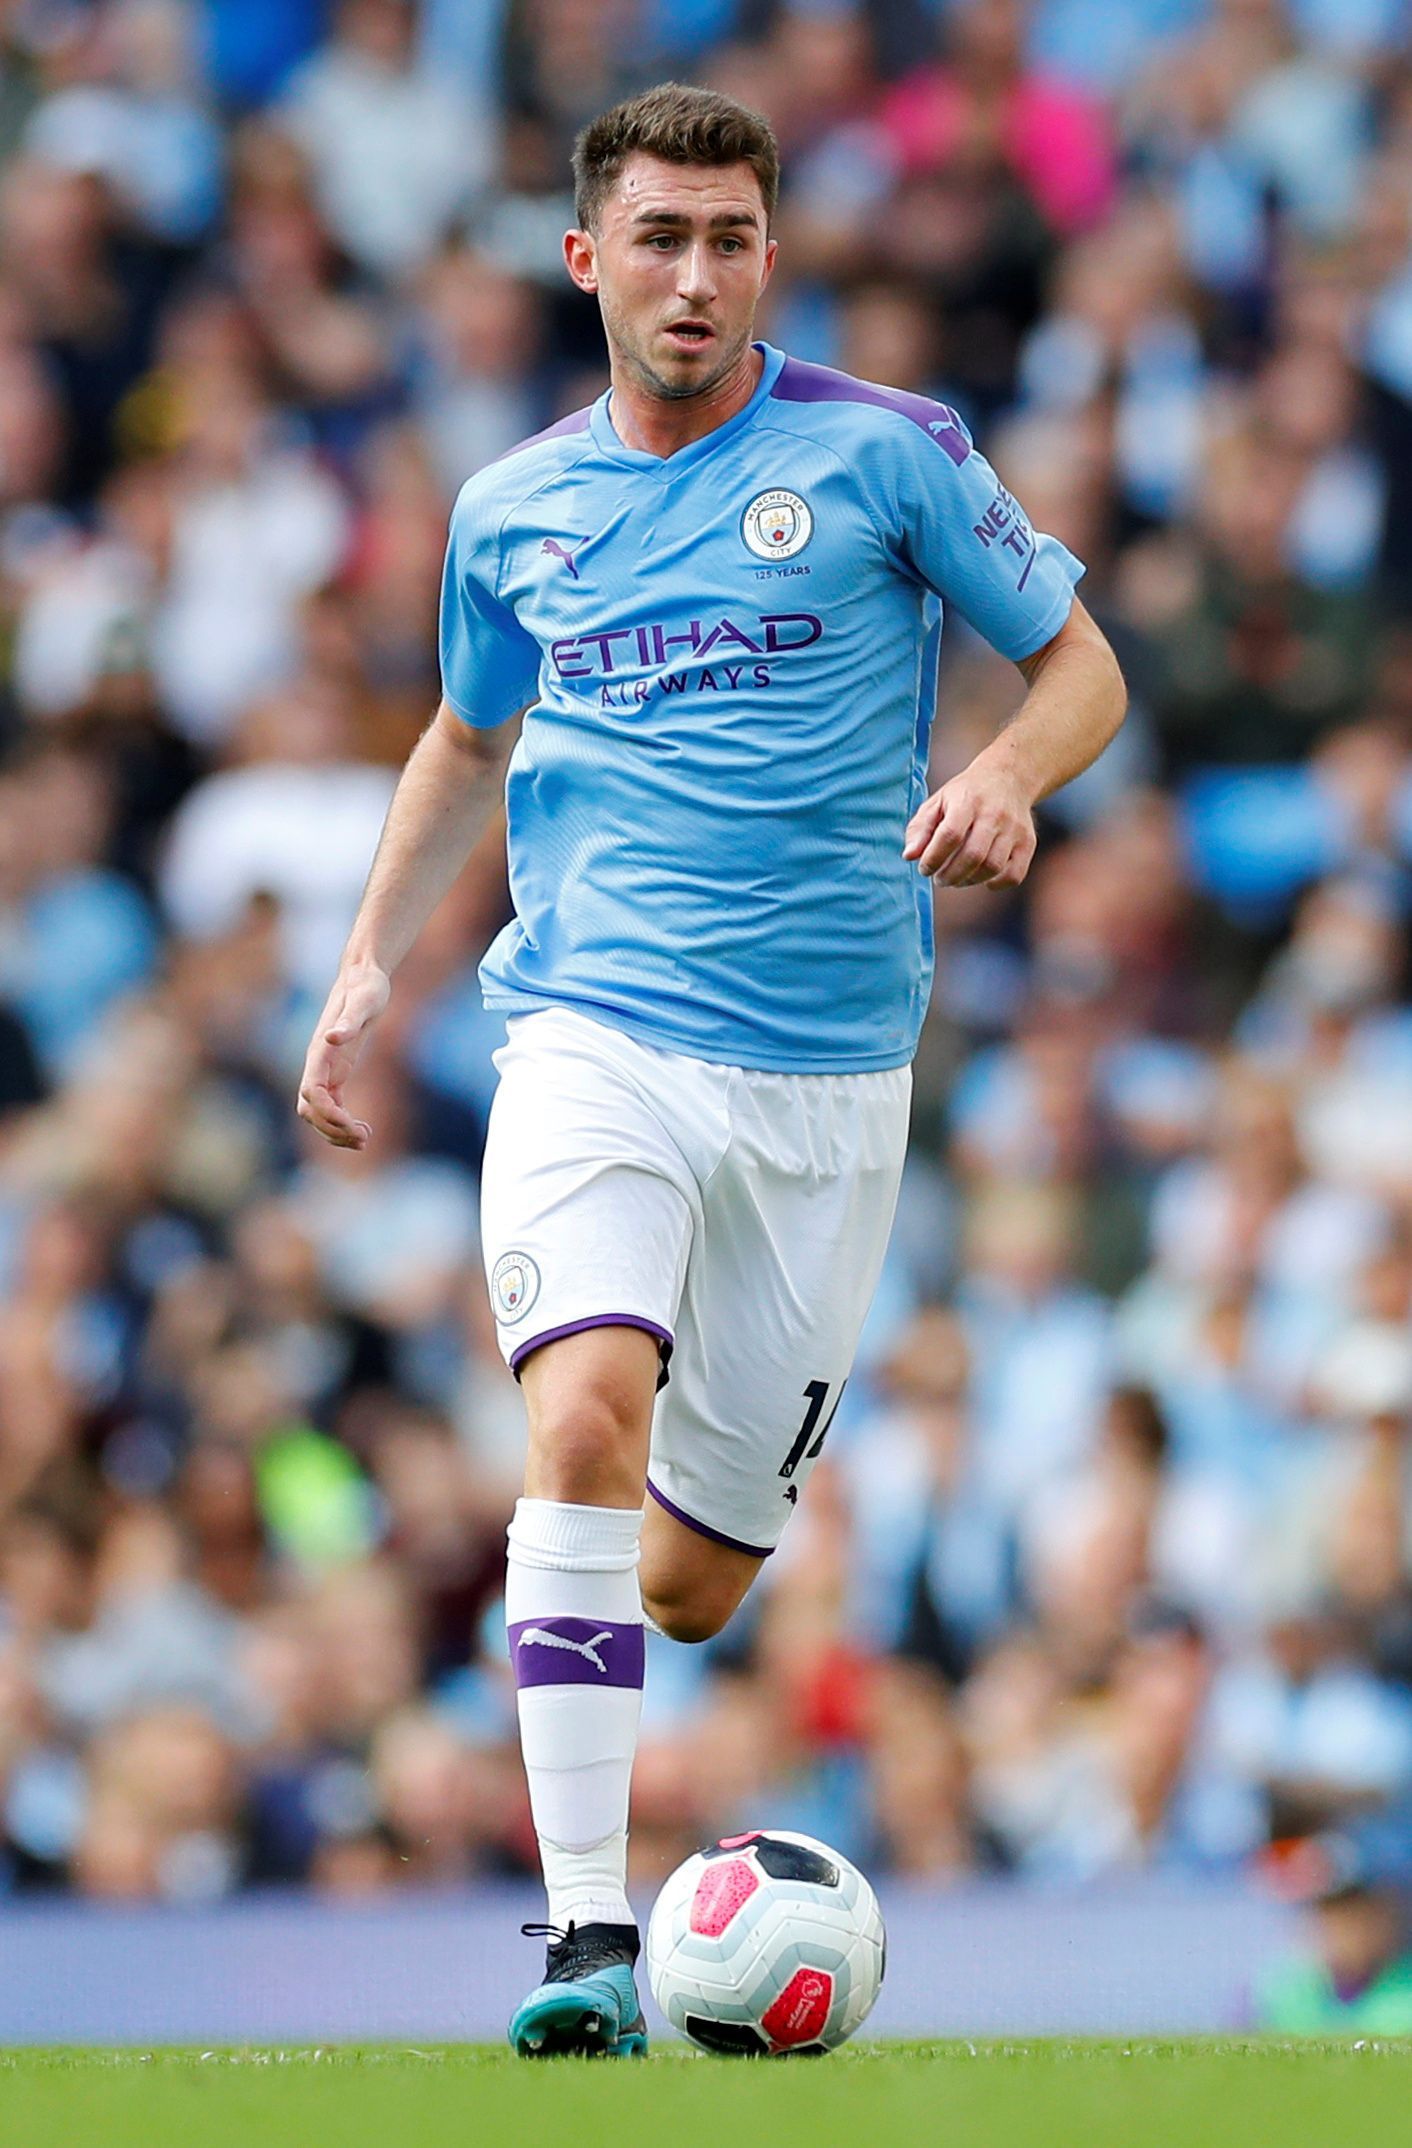 Soccer Football - Premier League - Manchester City v Tottenham Hotspur - Etihad Stadium, Manchester, Britain - August 17, 2019  Manchester City's Aymeric Laporte in action  REUTERS/Phil Noble  EDITORIAL USE ONLY. No use with unauthorized audio, video, data, fixture lists, club/league logos or 